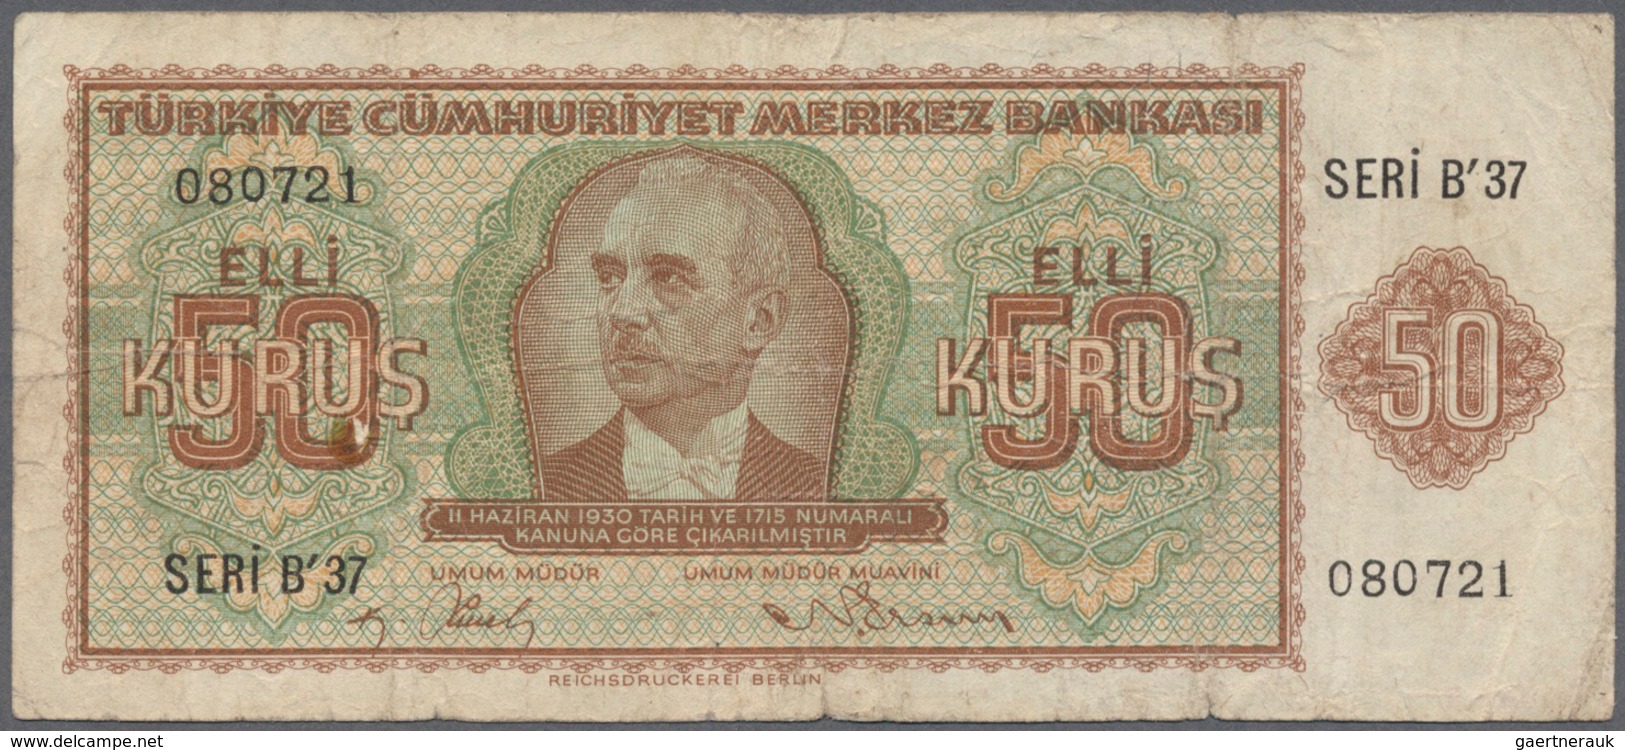 02528 Turkey / Türkei: 50 Kurus ND(1944) P. 134, Used With Several Folds And Staining In Paper, No Holes O - Turkey